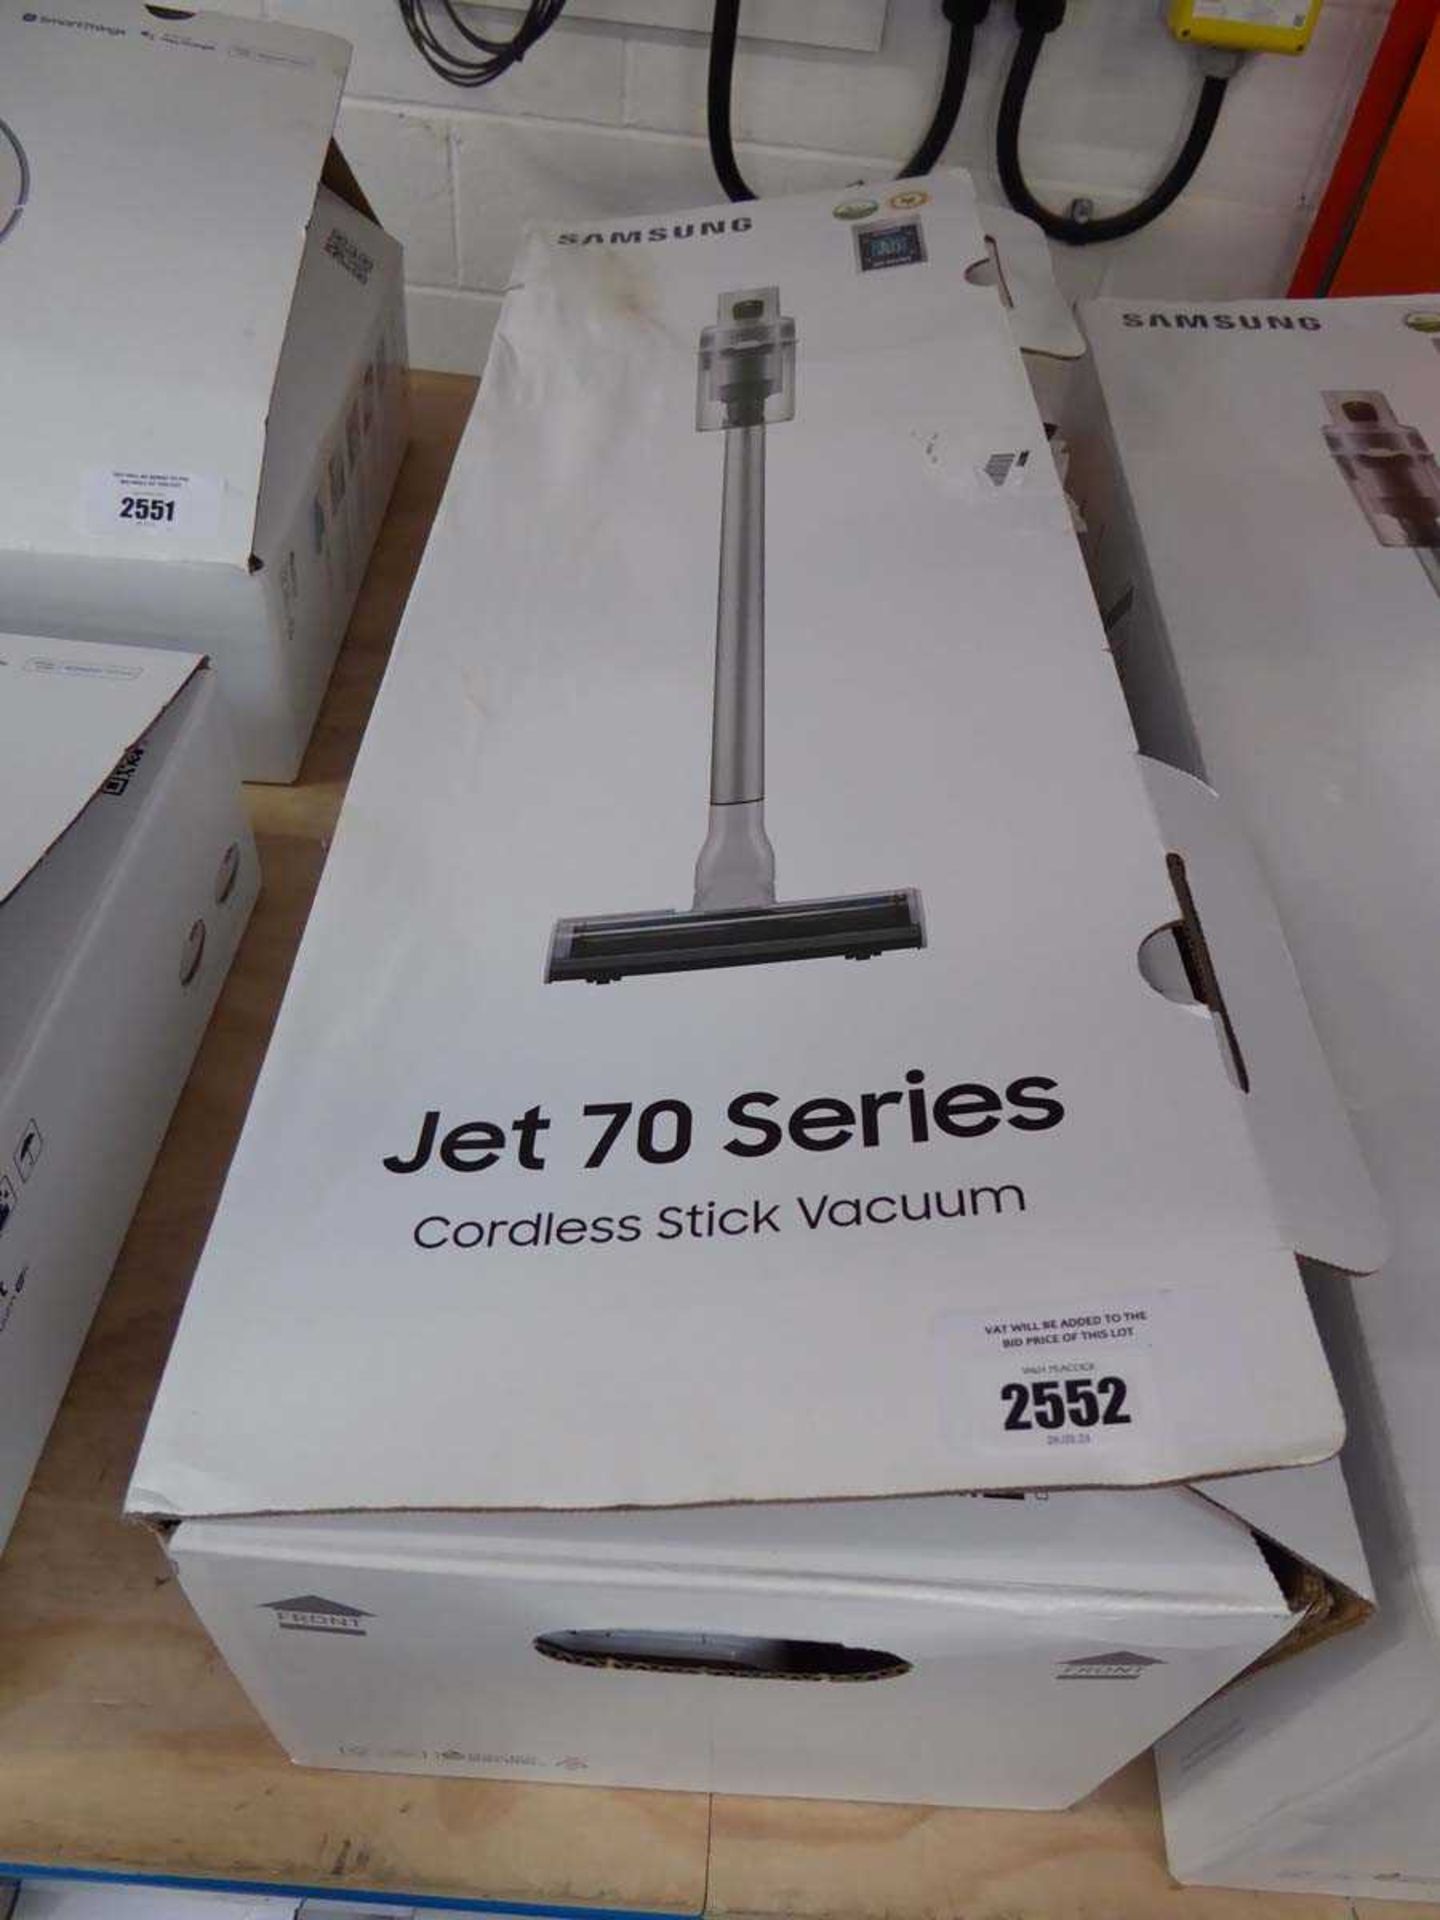 +VAT Samsung Jet 70 Series cordless stick vacuum cleaner with battery, charger and accessories